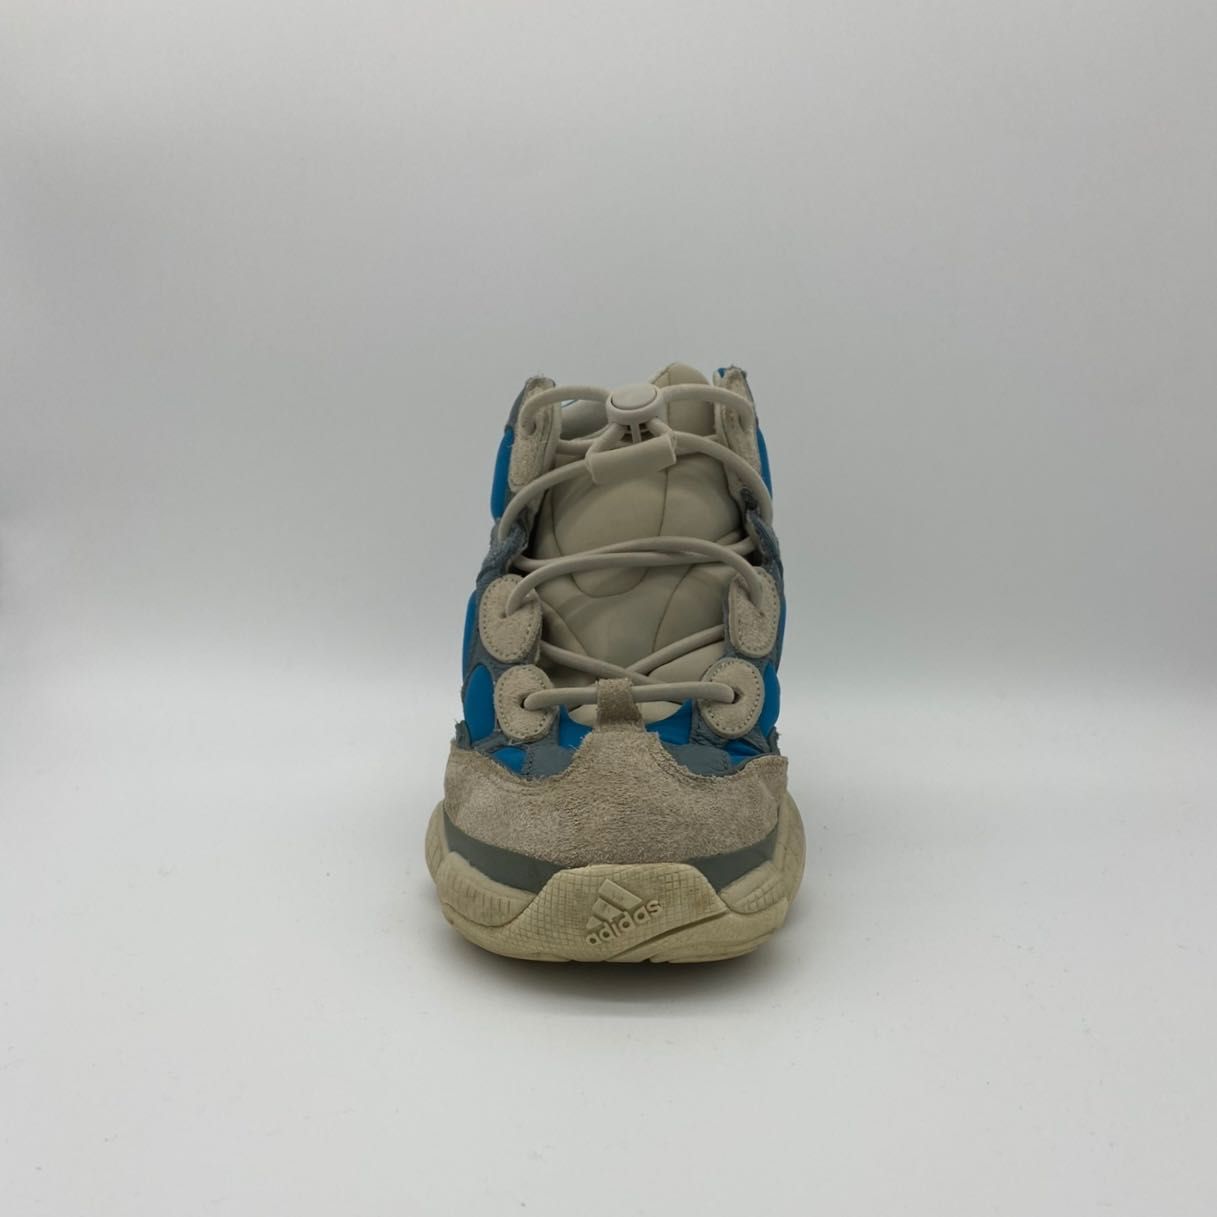 Yeezy 500 High Frosted Blue  Marimea (Size) 40.5  100% Authentic